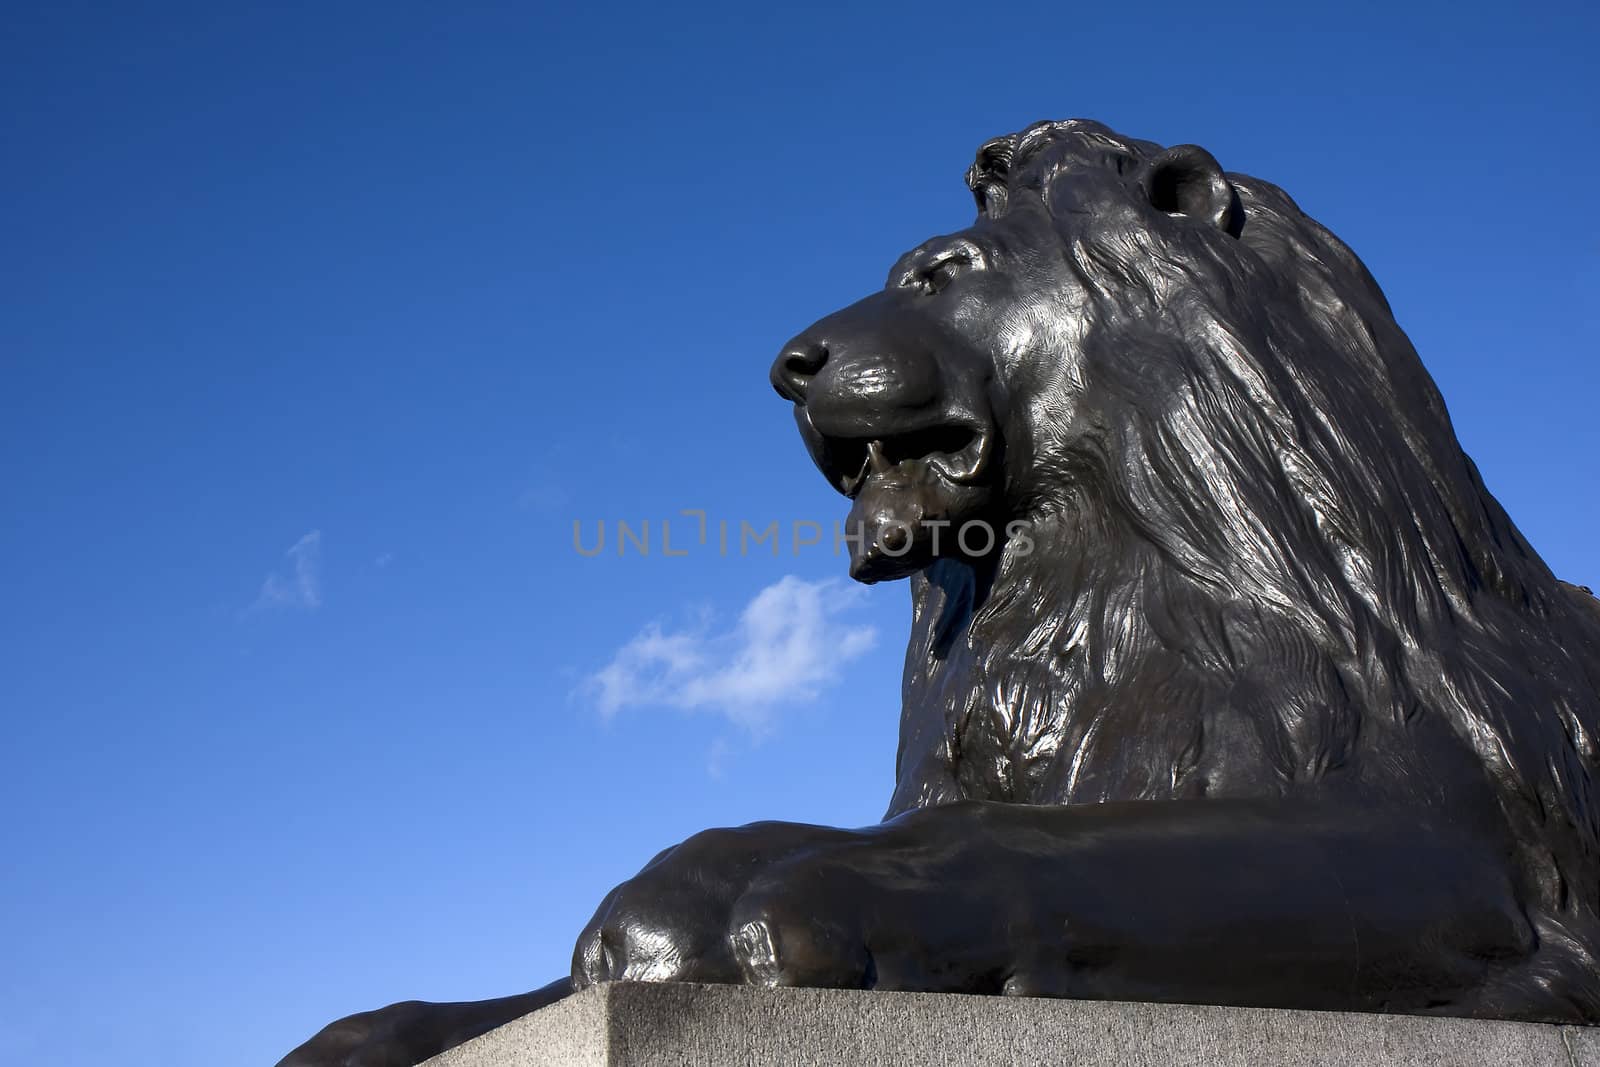 Close up of one of the bronze lions at Trafalgar Square, London, England.